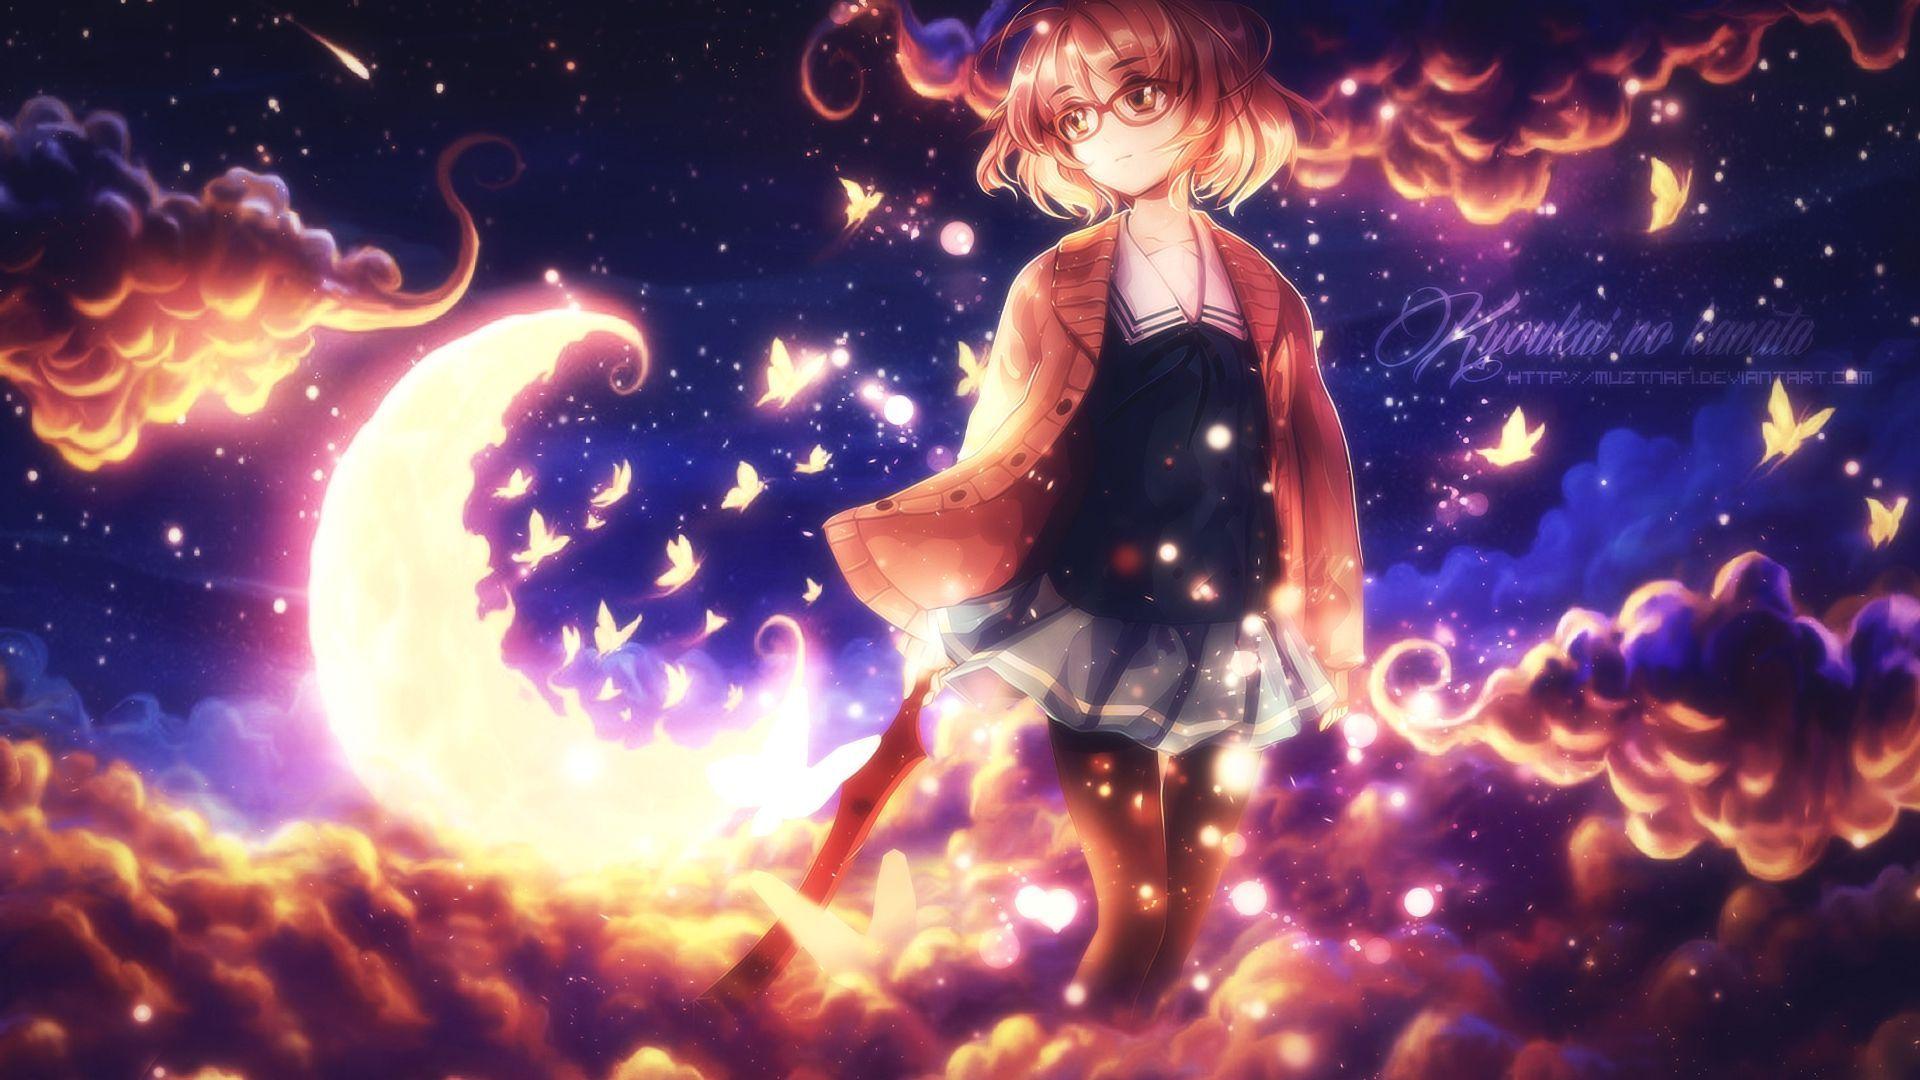 Anime Beyond the Boundary HD Wallpaper by Rito